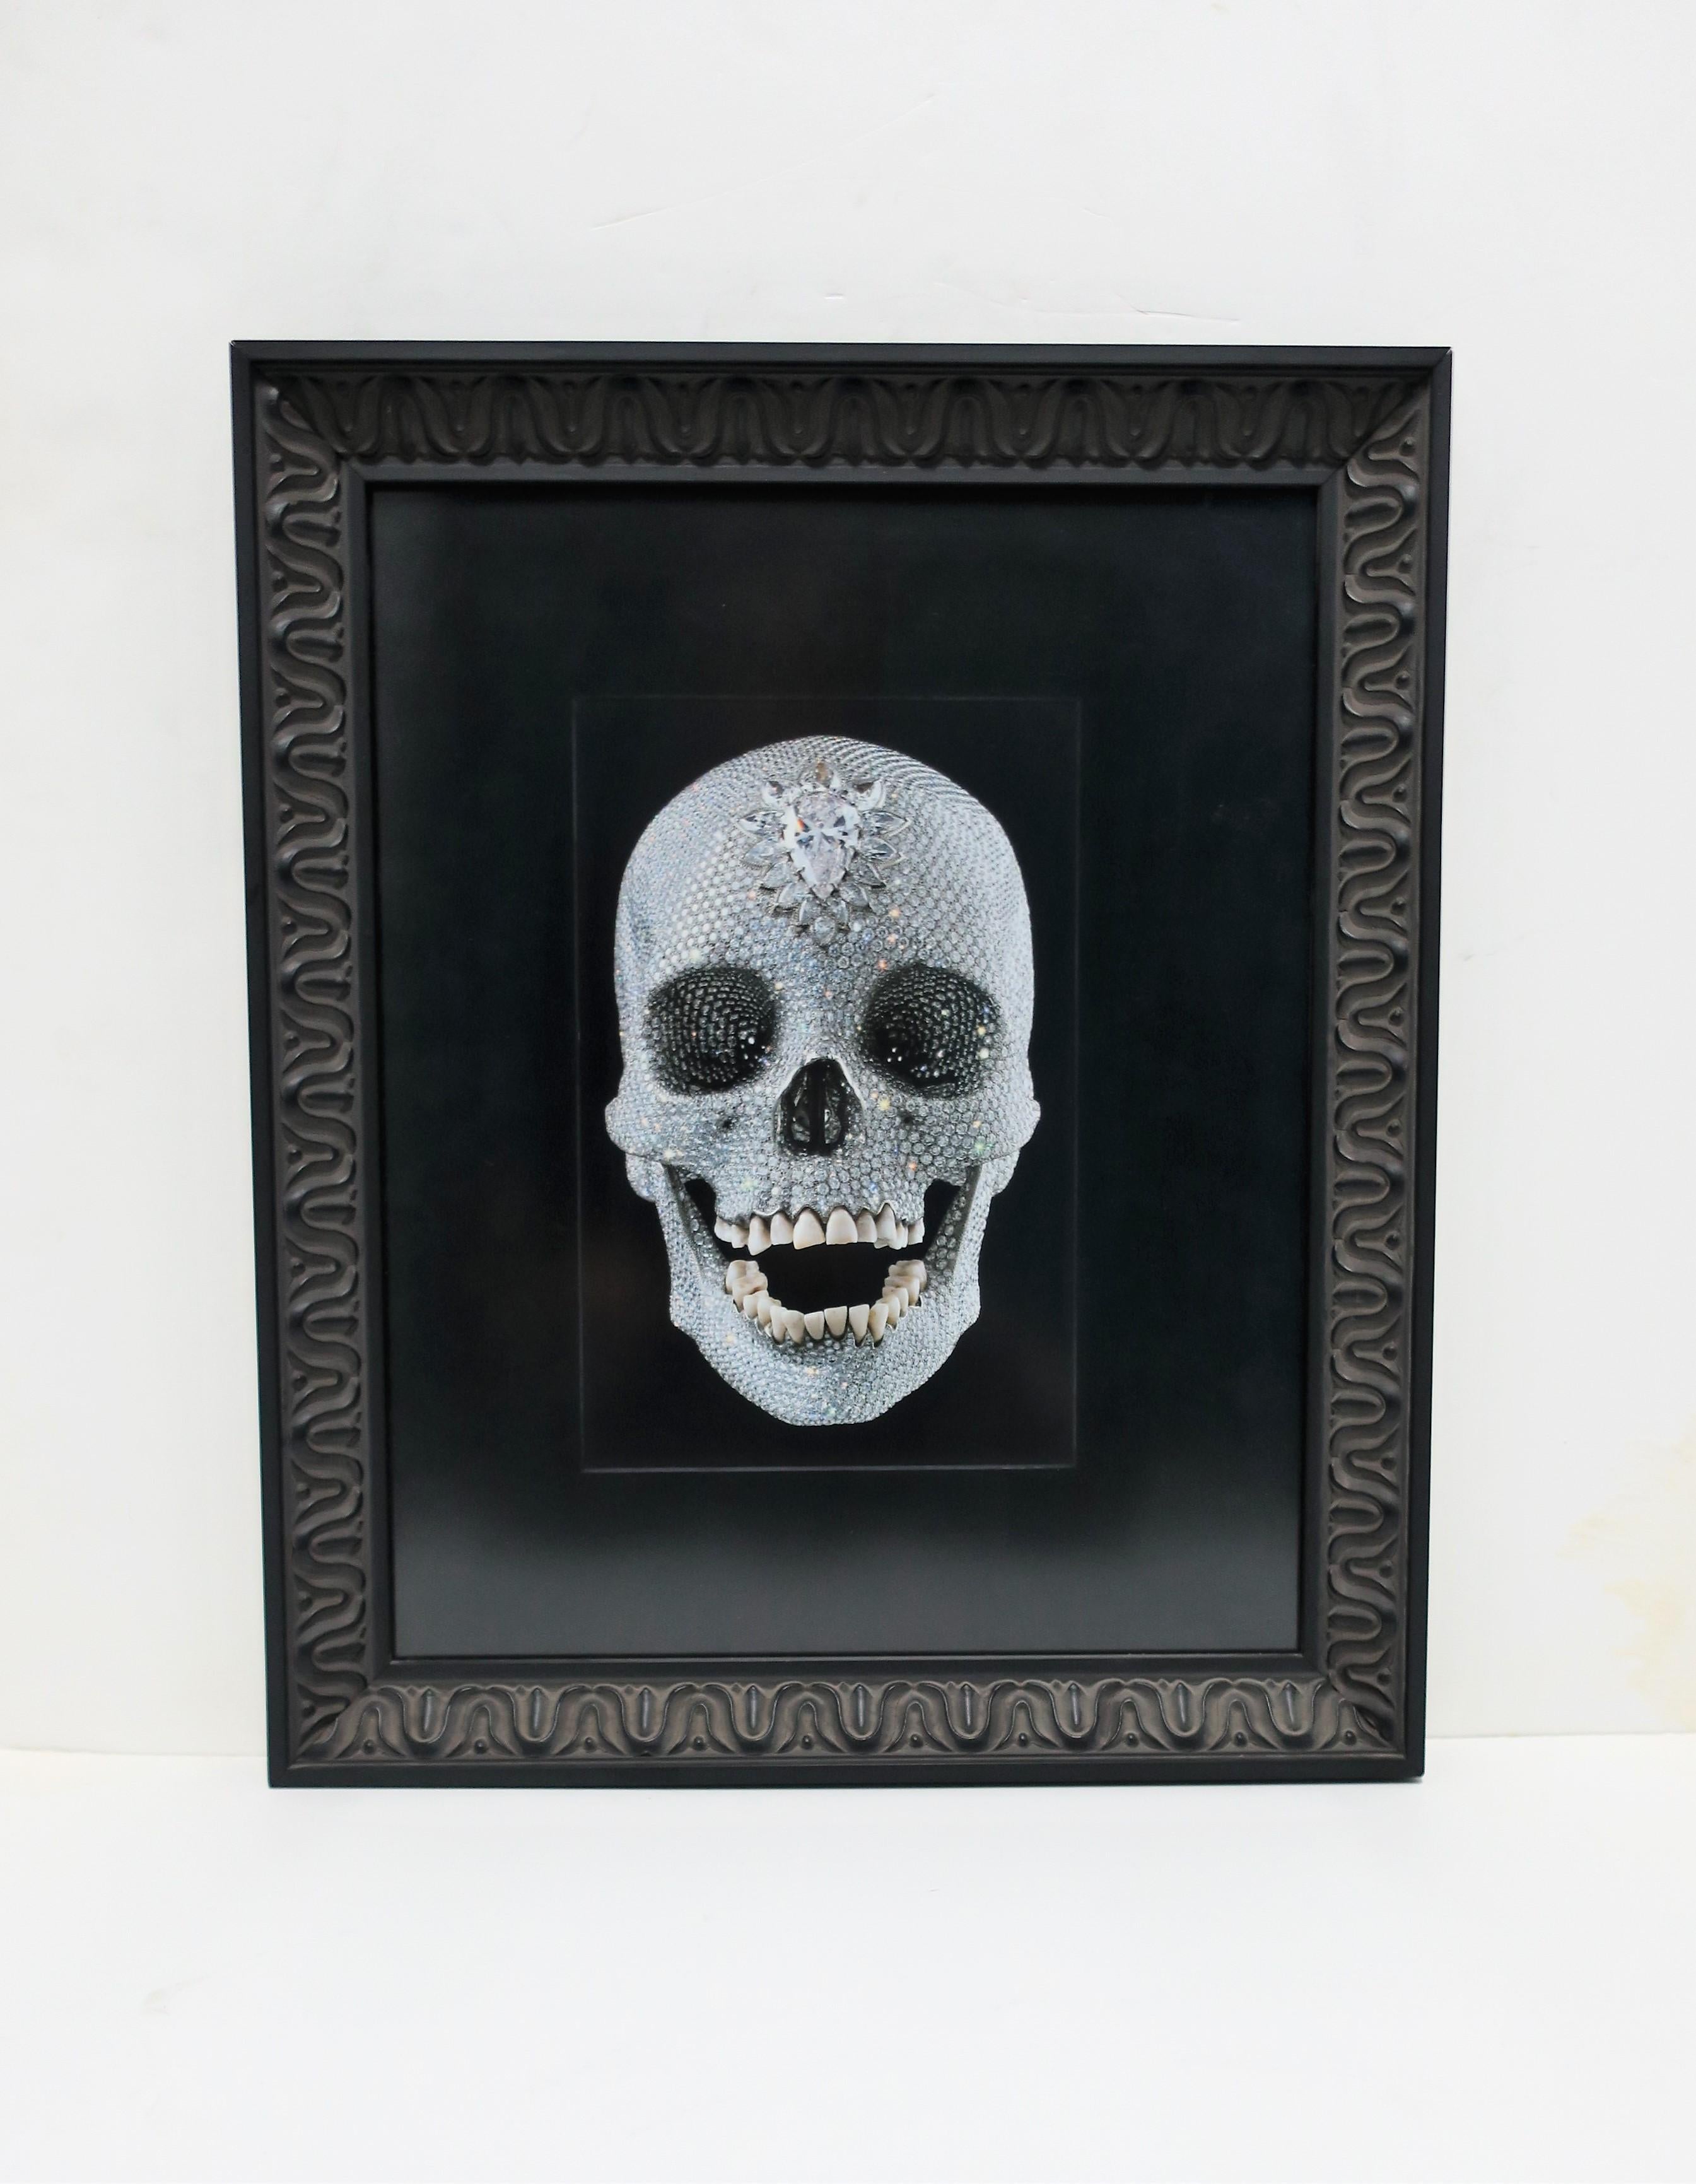 A beautiful image of a platinum and diamond skull with human teeth, titled, 'For the Love of God', a sculpture created by English artist, Damien Hirst, circa 2007. Photograph or art work, 'For the Love of God', is surrounded by black matte paper,